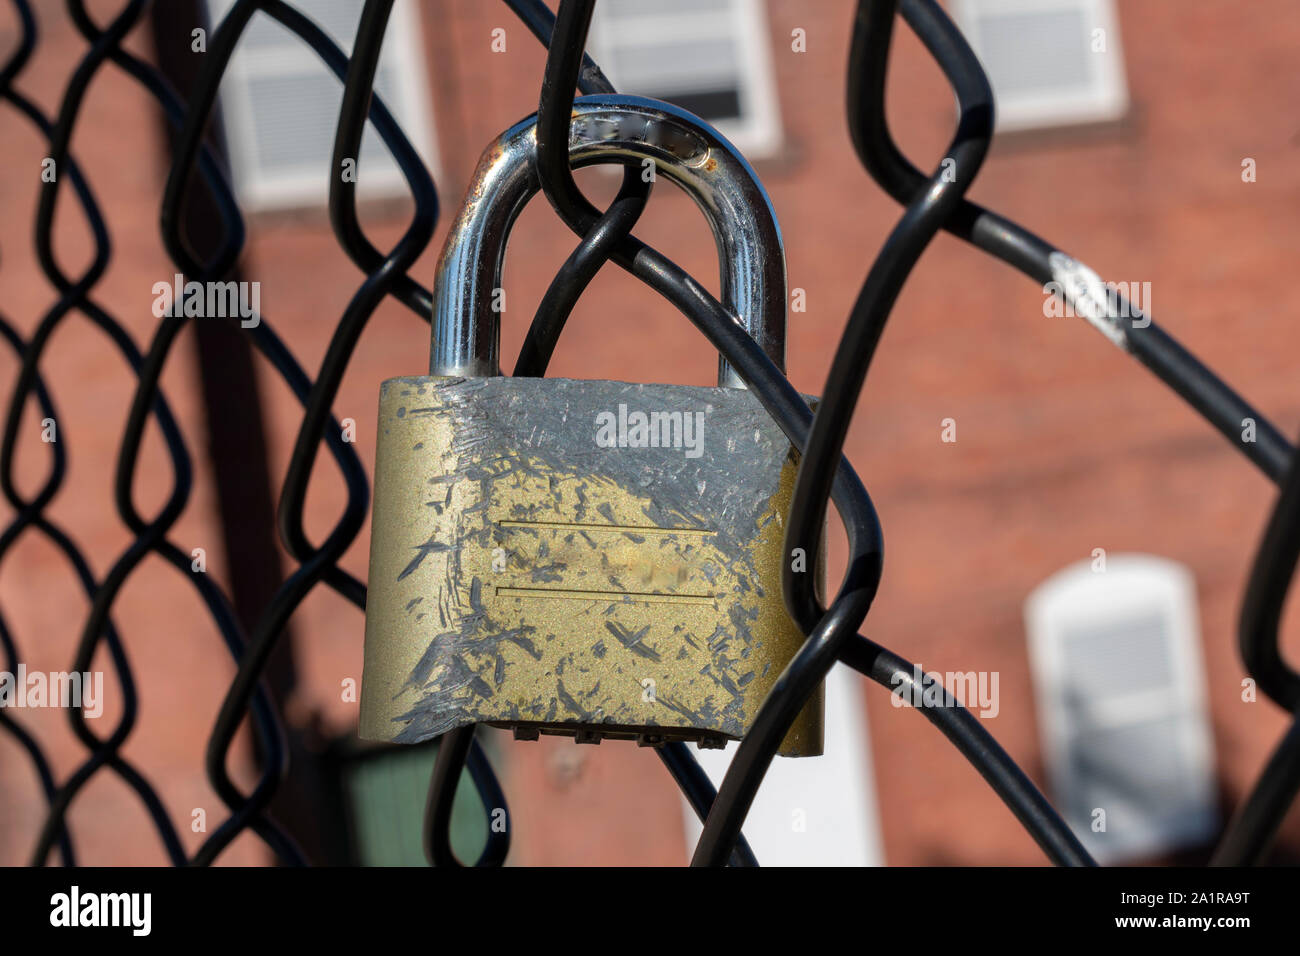 locks on a wire fence Stock Photo